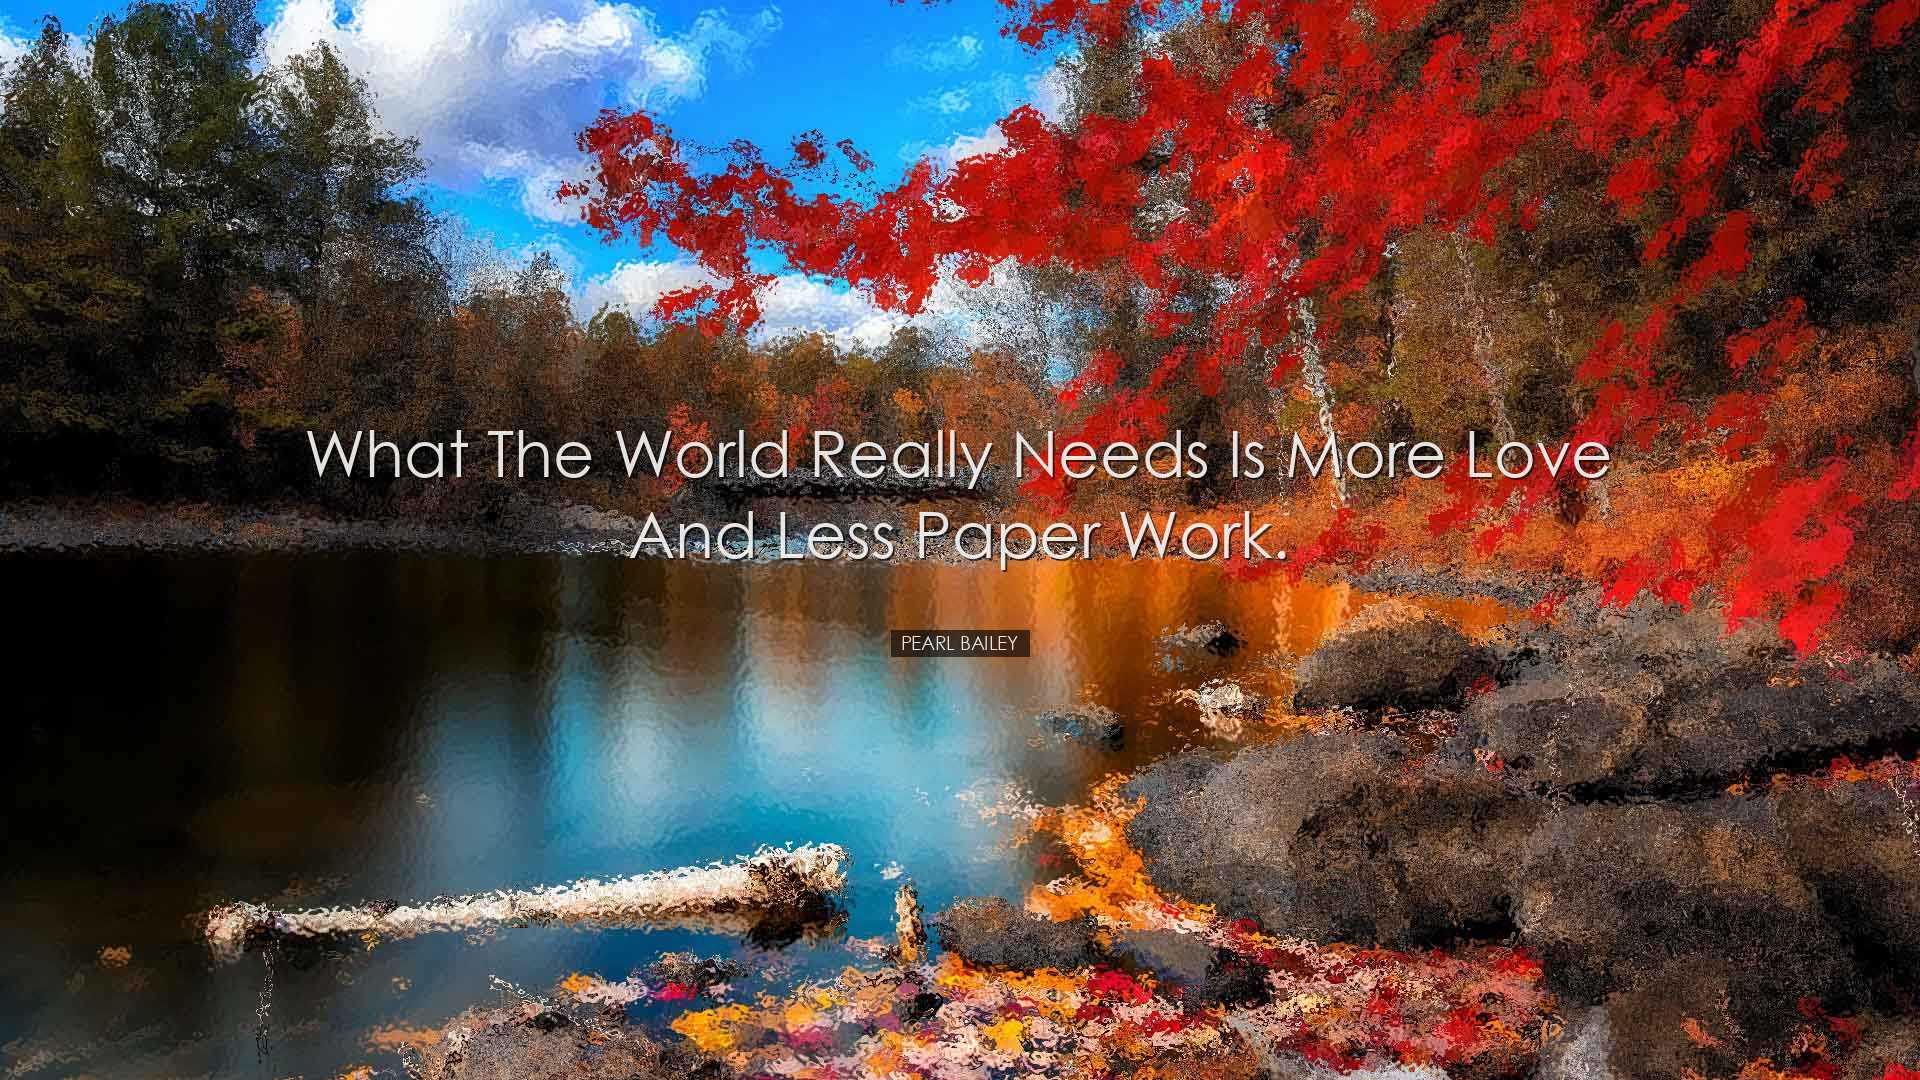 What the world really needs is more love and less paper work. - Pe